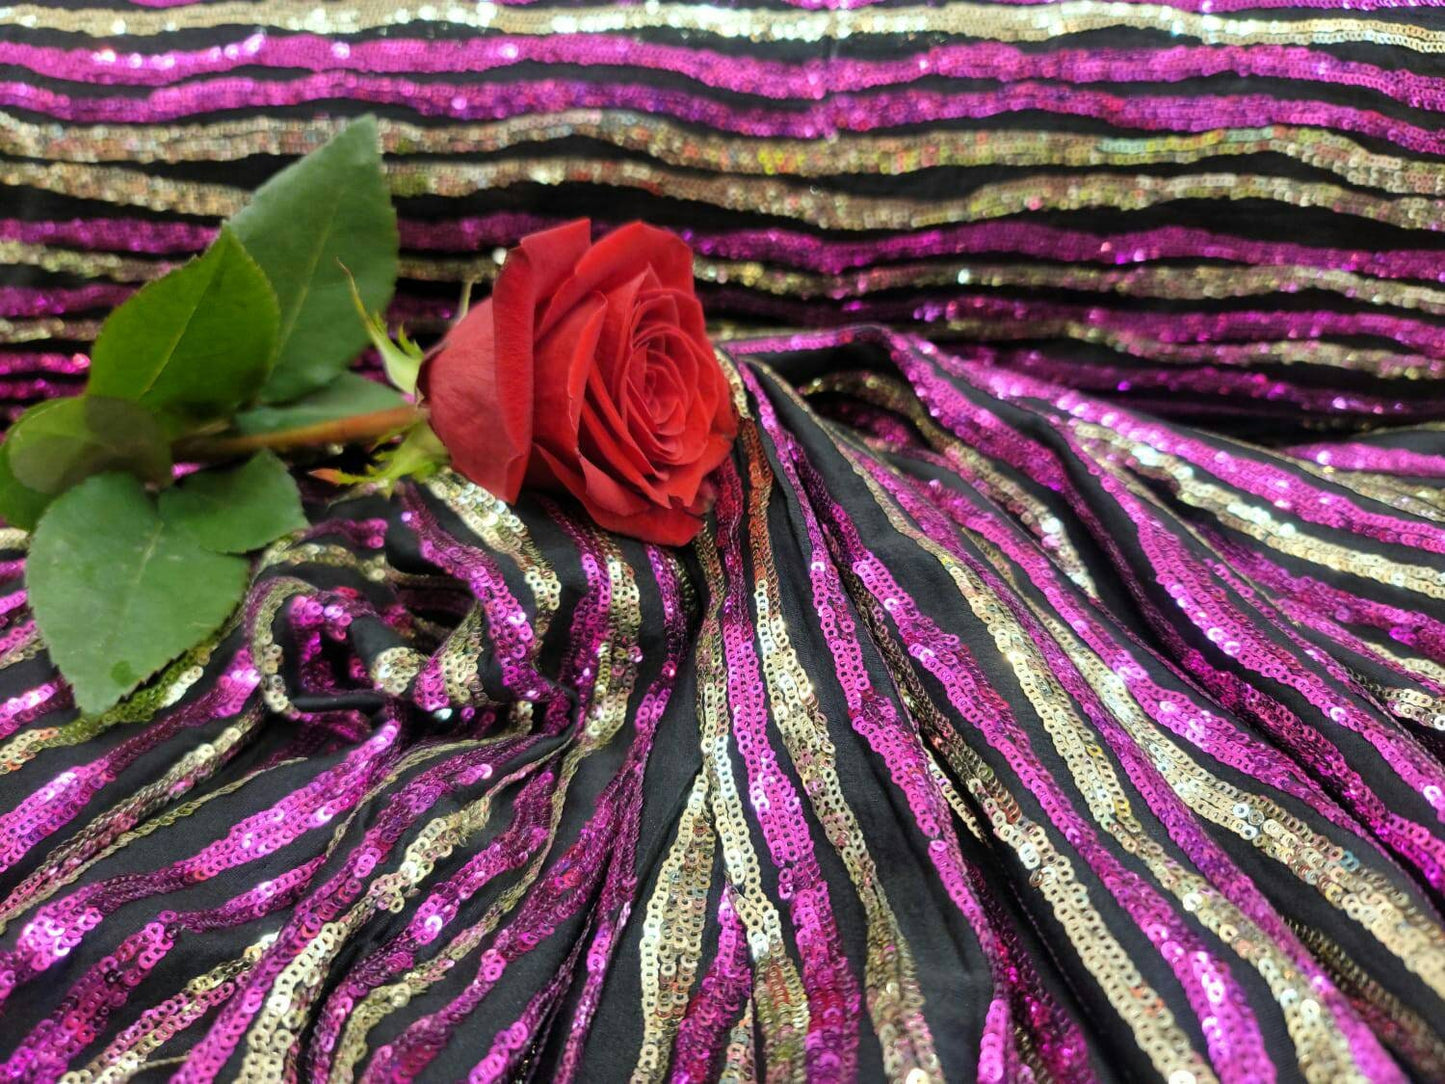 Gold and Fuchsia Sequin Shine Sequin Fabric Sold By The Yard Fashion Sequin on Black Jersey Knit Stretch Sequin Stripes Sequin Gold